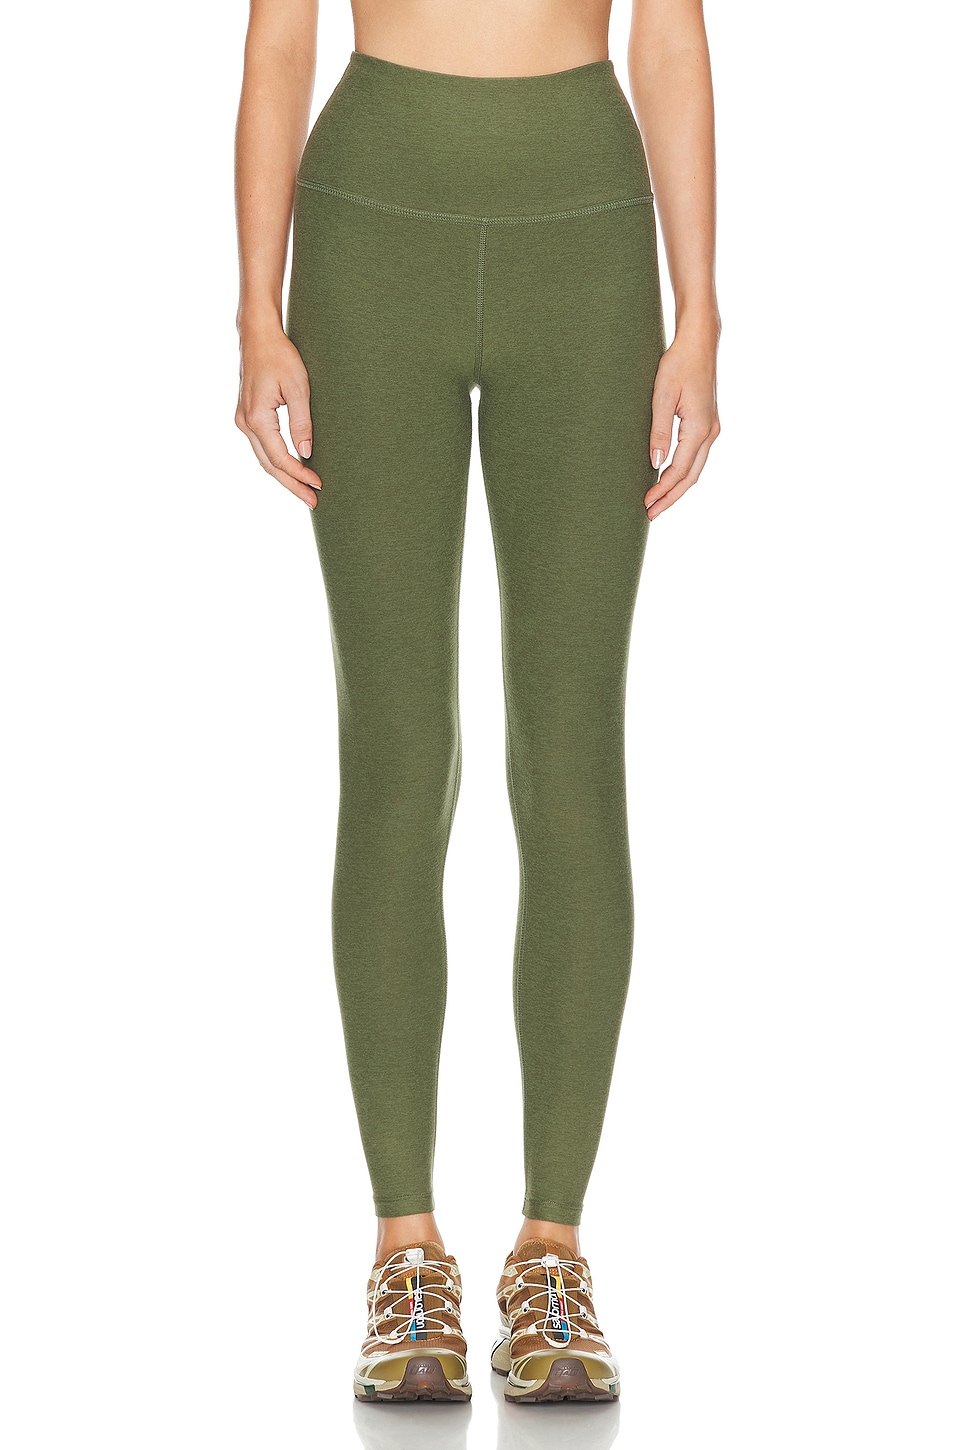 Spacedye Caught In The Midi High Waisted Legging in Sage